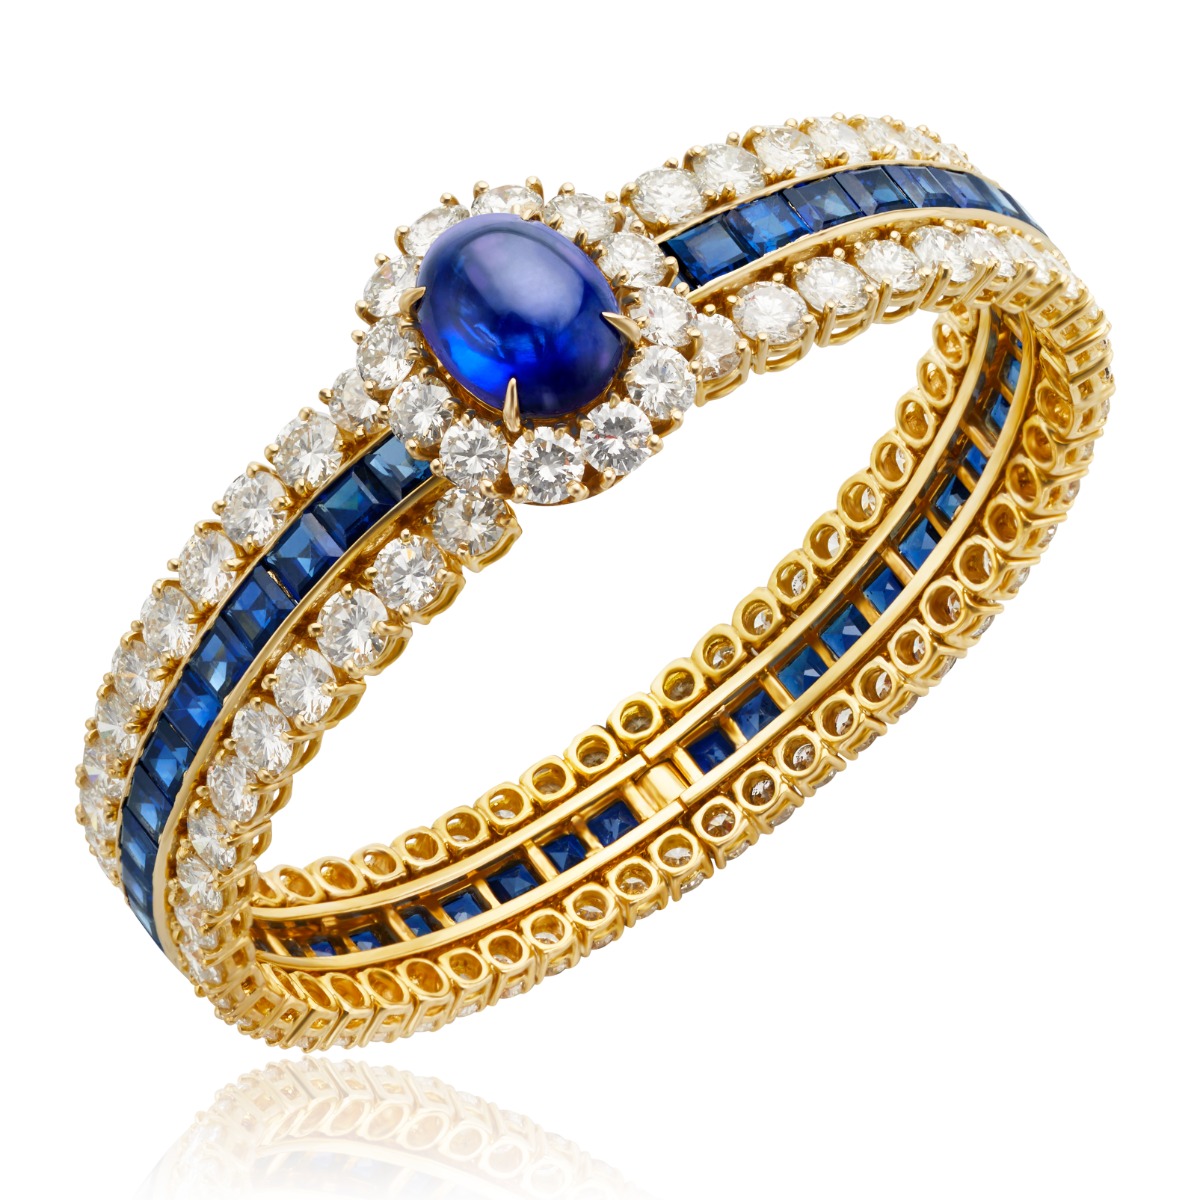 Van Cleef & Arpels 1970s Sapphire and Diamond 18kt Yellow Gold Bangle